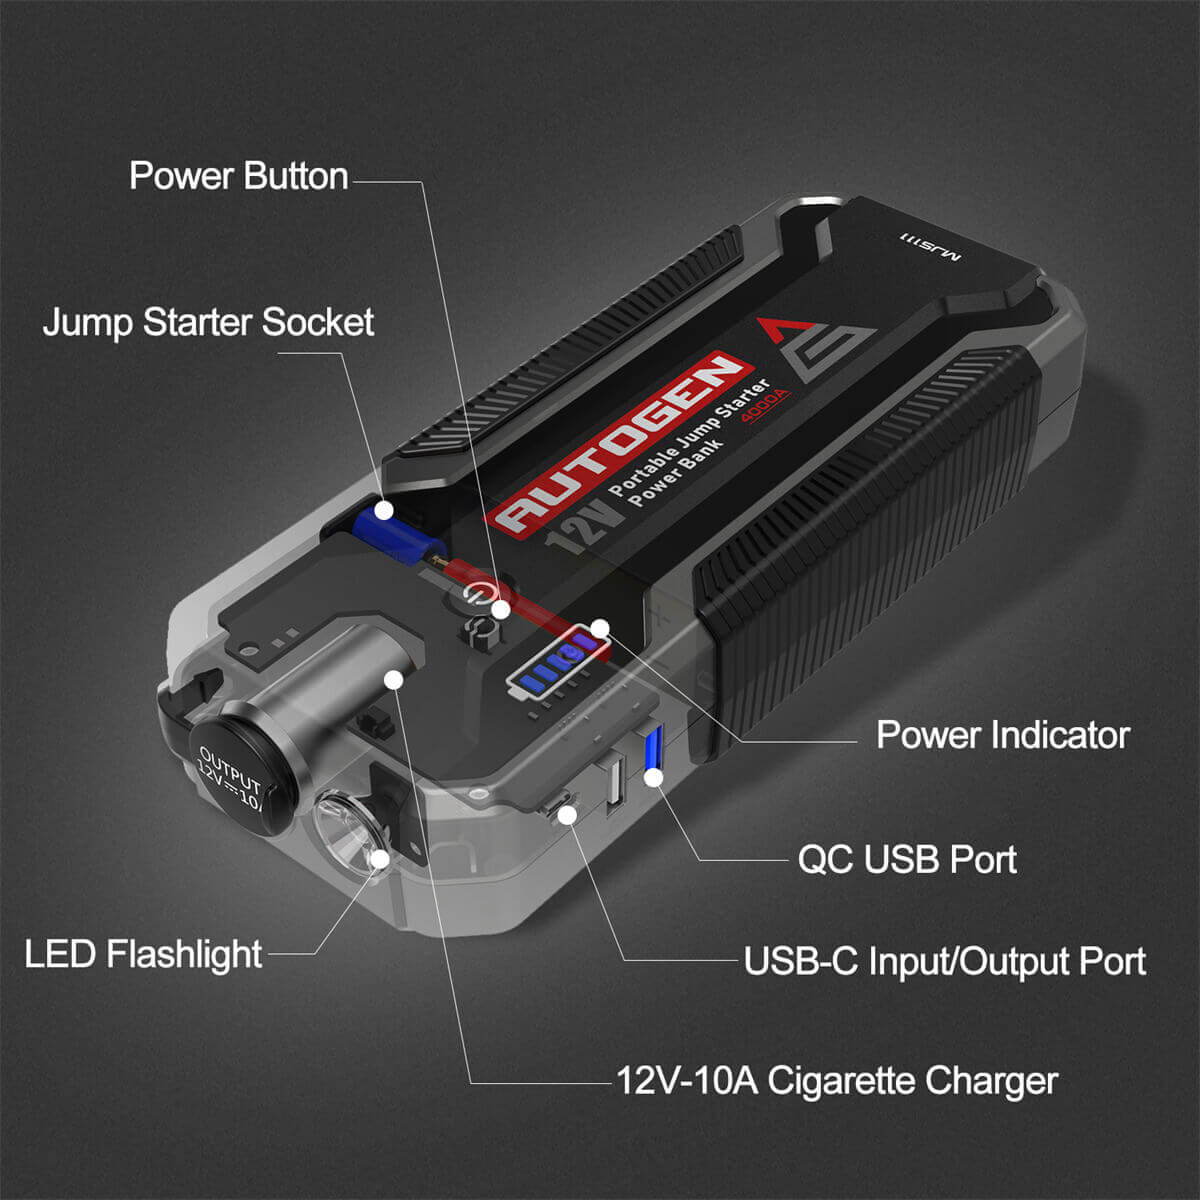 AUTOGEN 4000A Car Jump Starter (10.0L+ Gasoline & Diesel), 12-Volt Portable  Lithium Battery Jumper Box Booster Pack For Cars, SUVs, Trucks. Huge Power  Bank With Quick Charge 3.0 